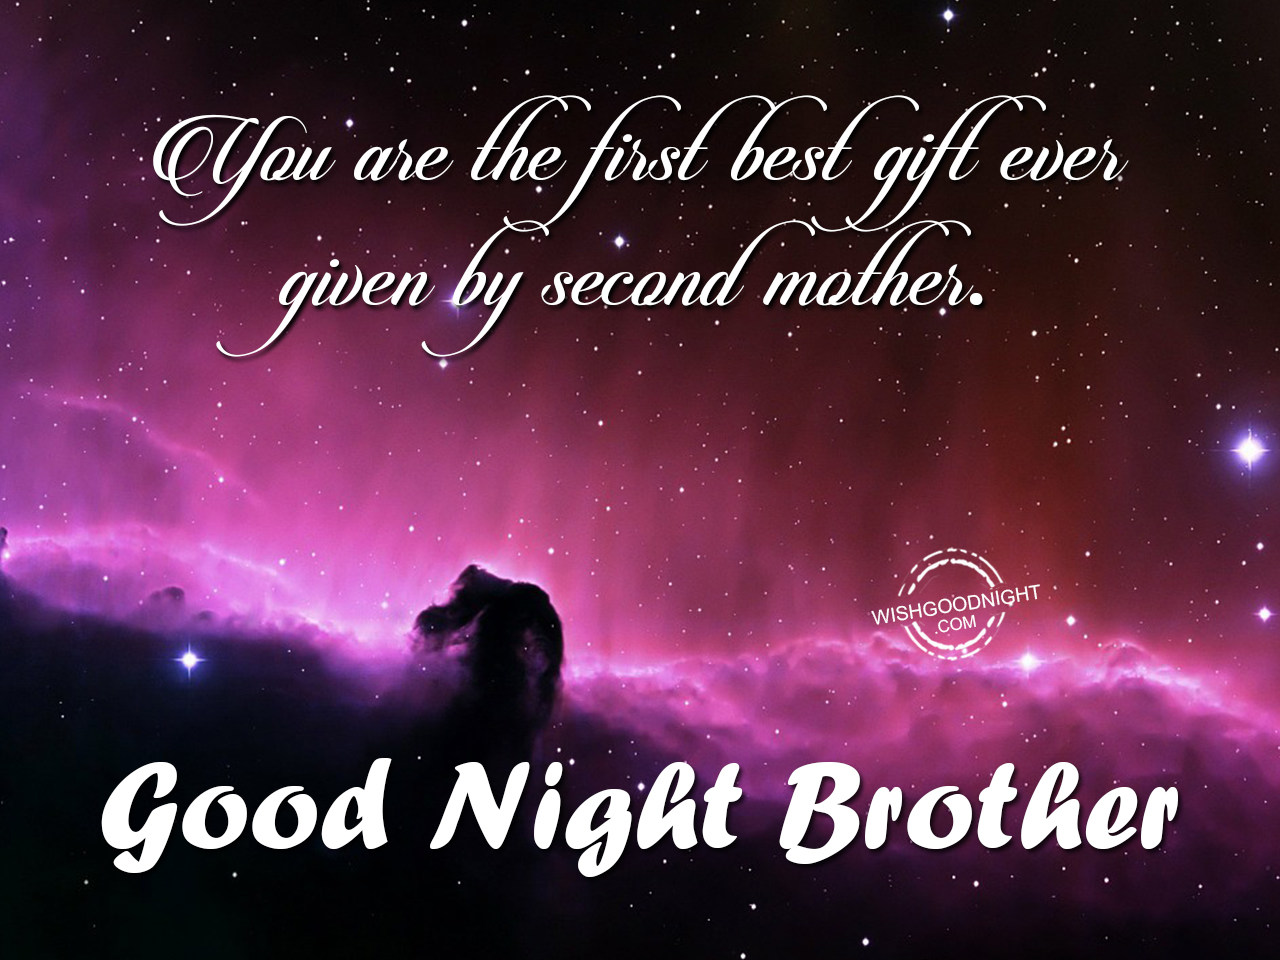 You are the best gift - Good Night Brother.